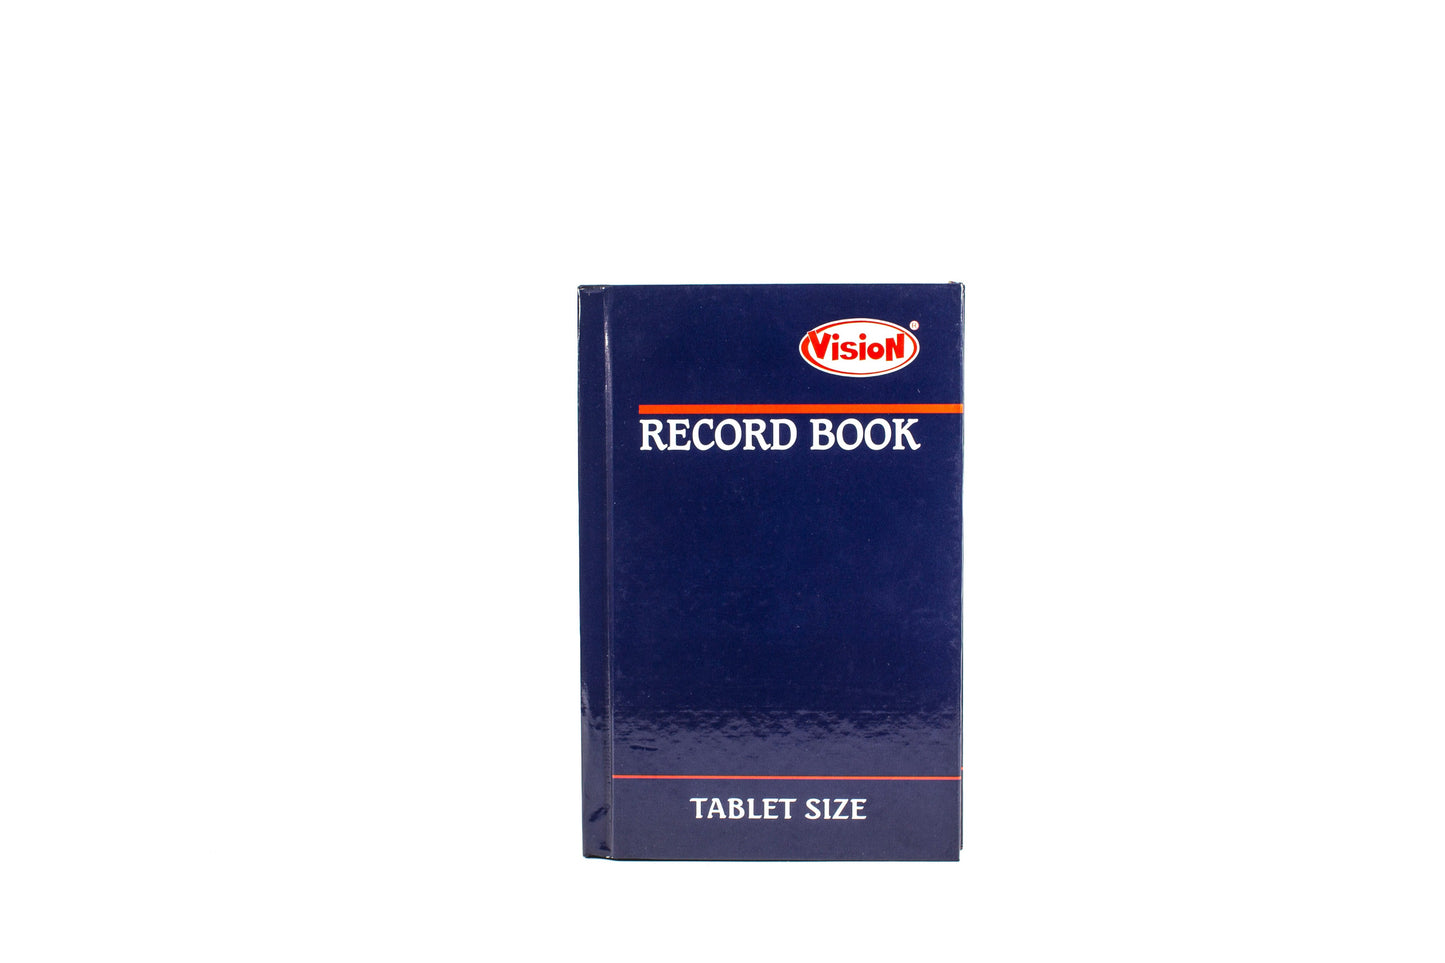 Vision Record Book Tablet Size